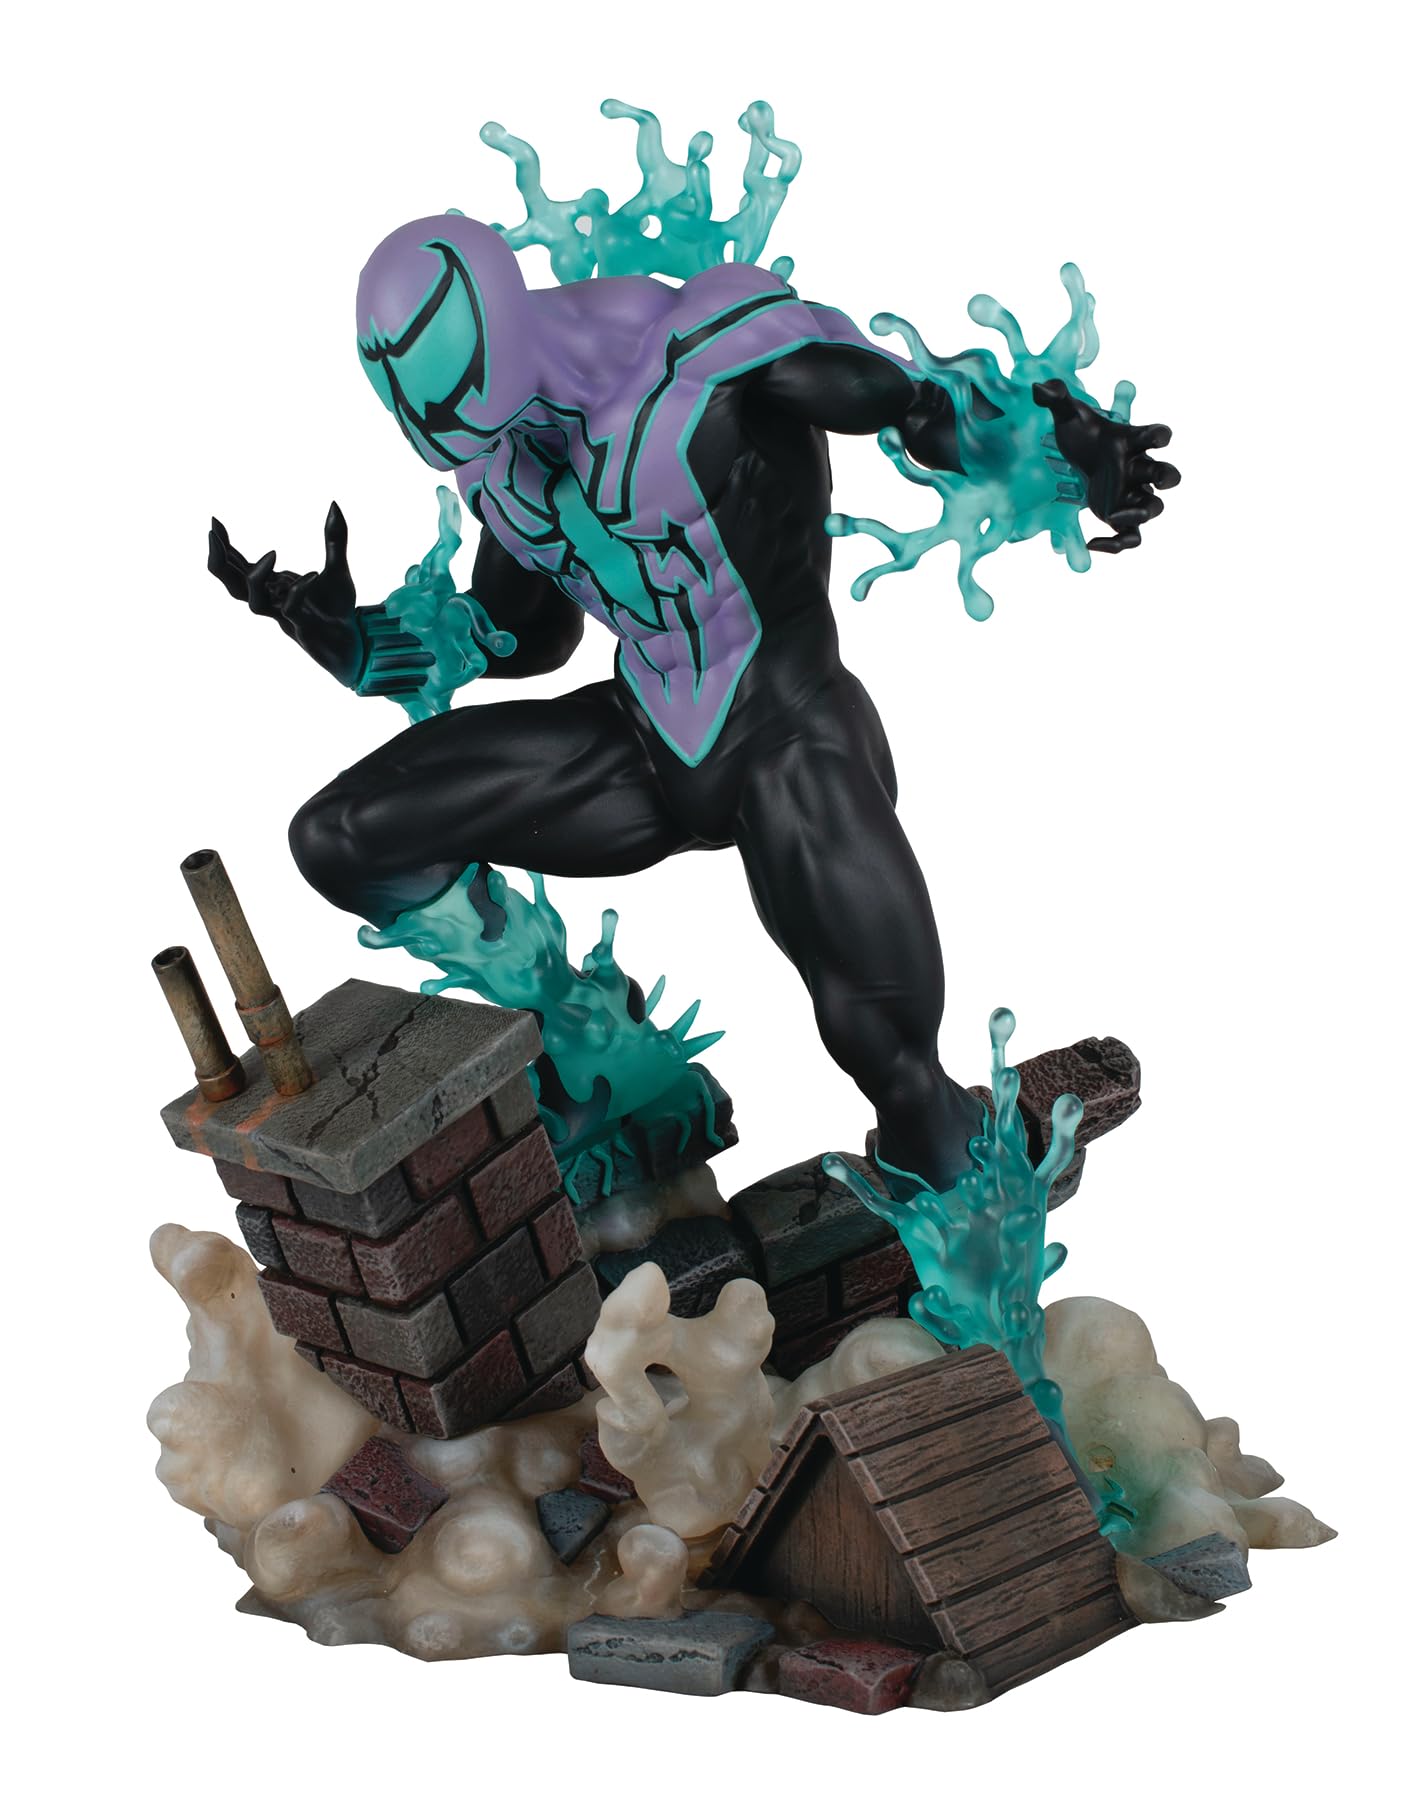 Marvel Gallery: Comic Chasm PVC Statue